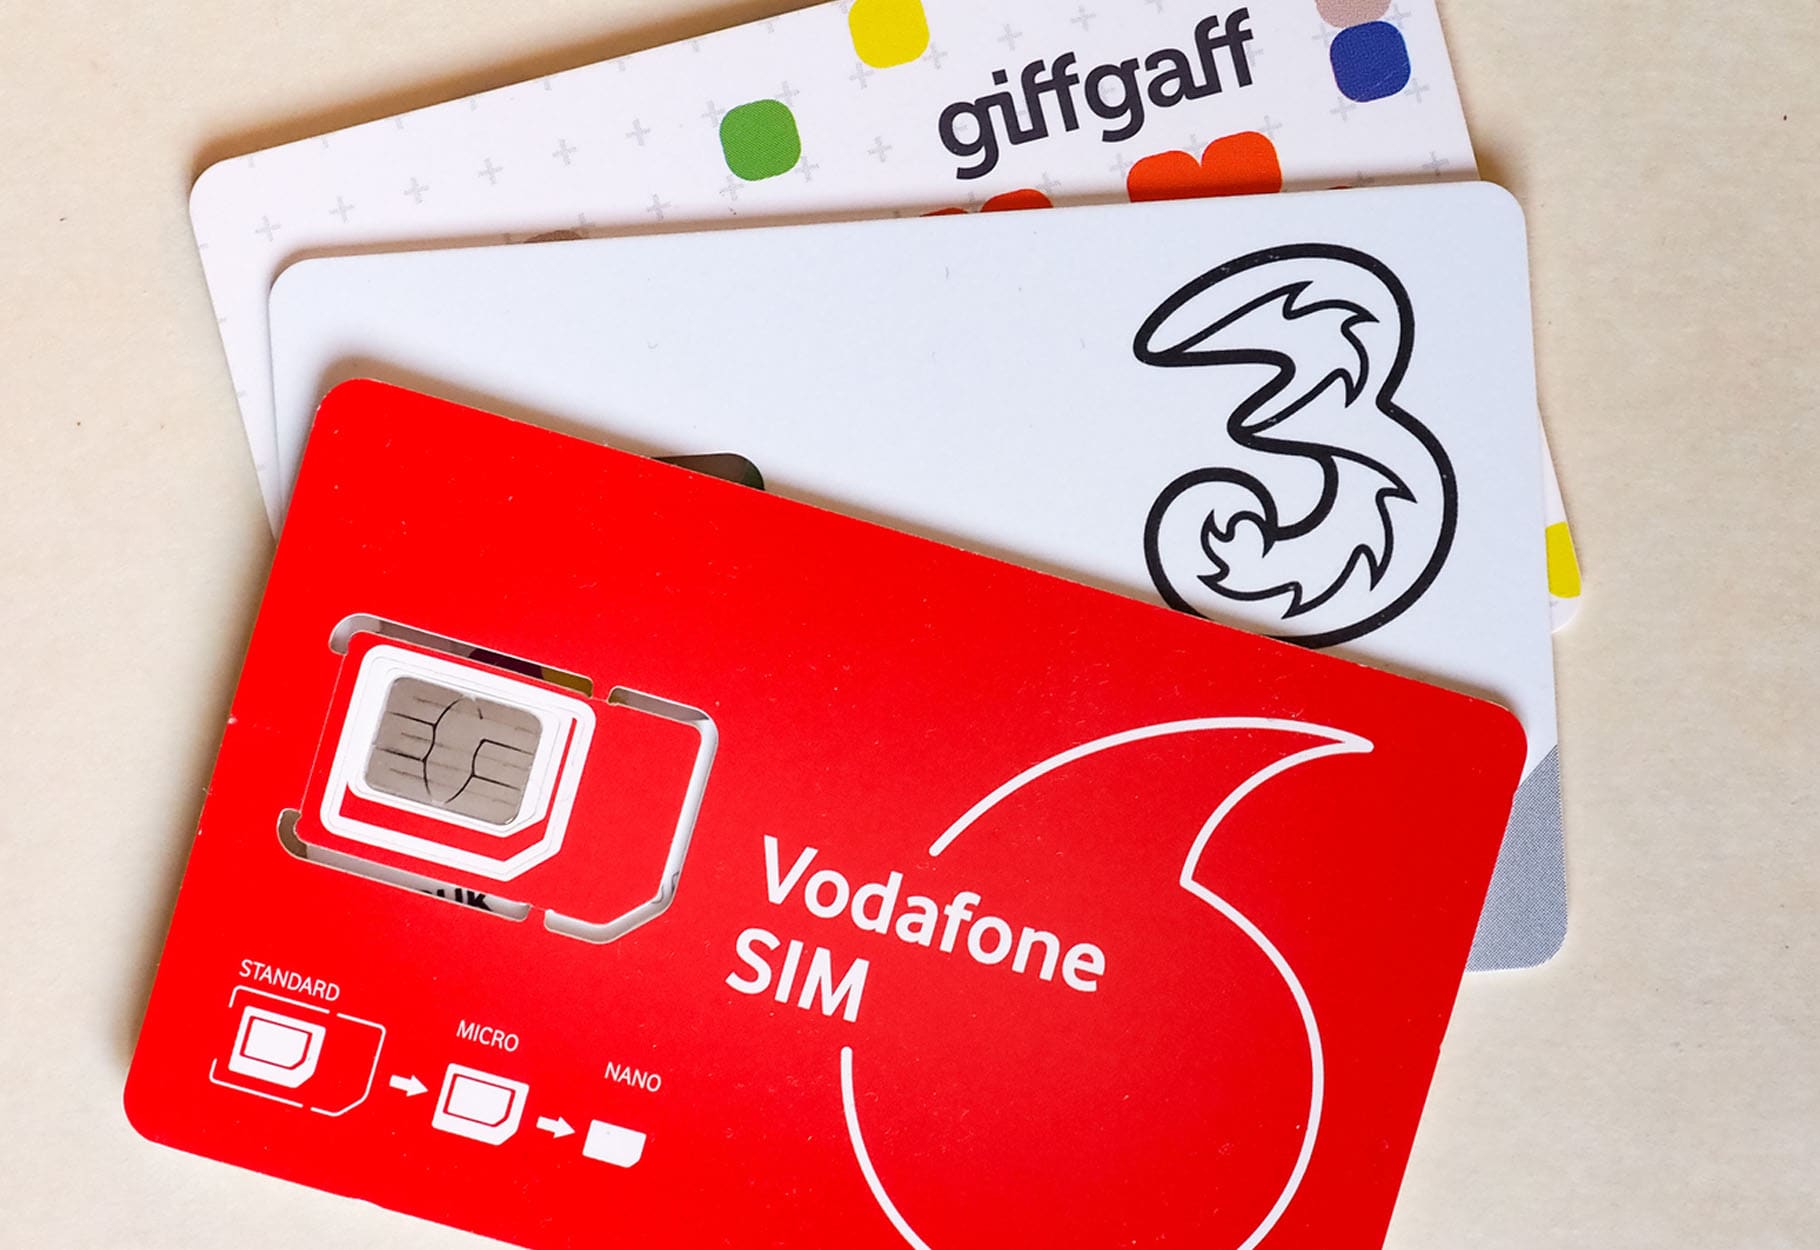 activating-vodafone-sim-card-simple-steps-to-follow